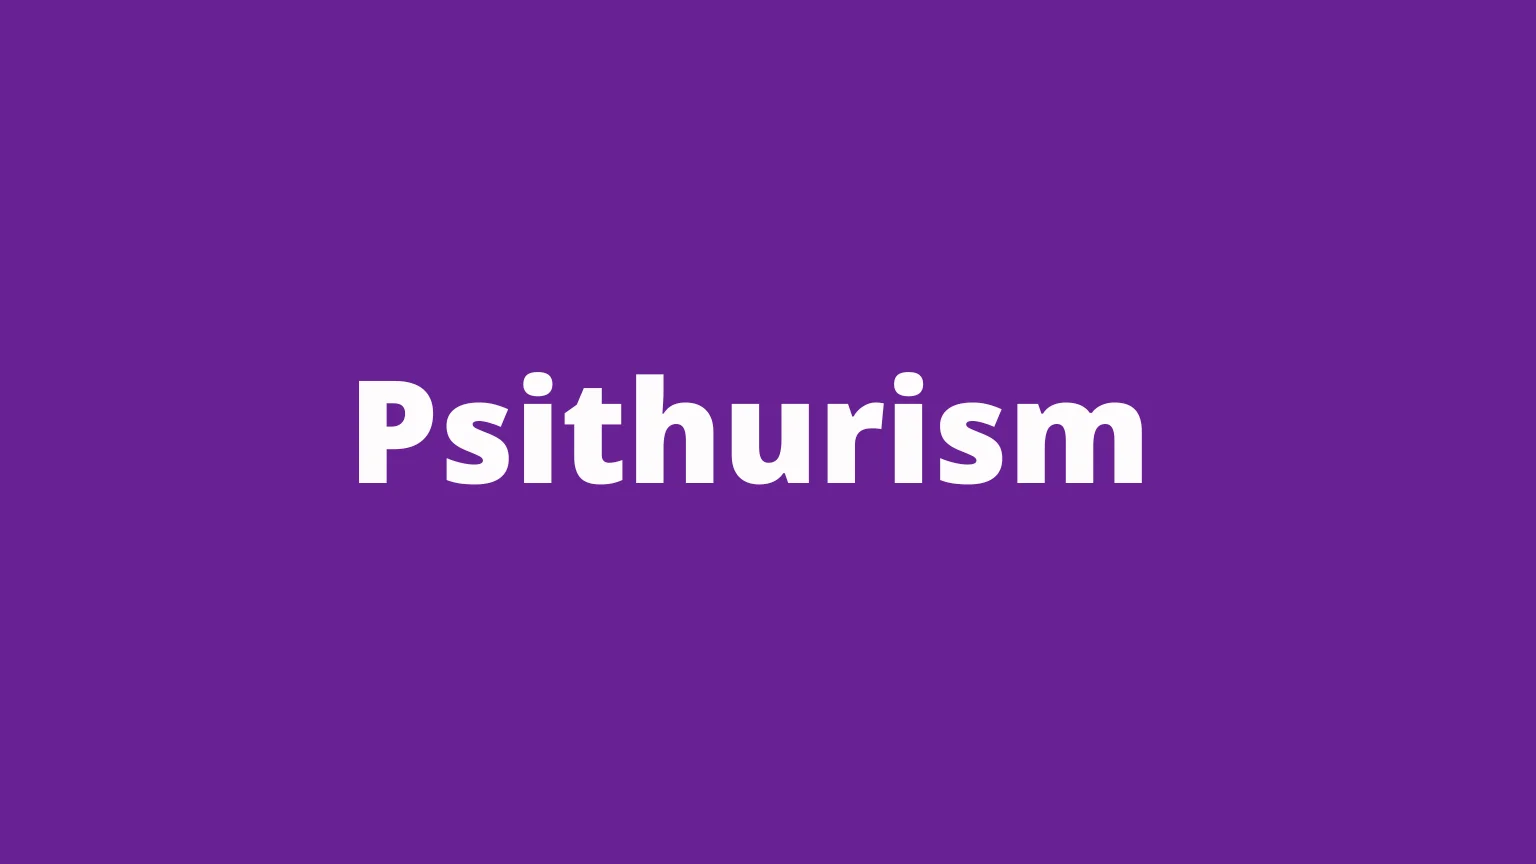 The word psithurism and its meaning